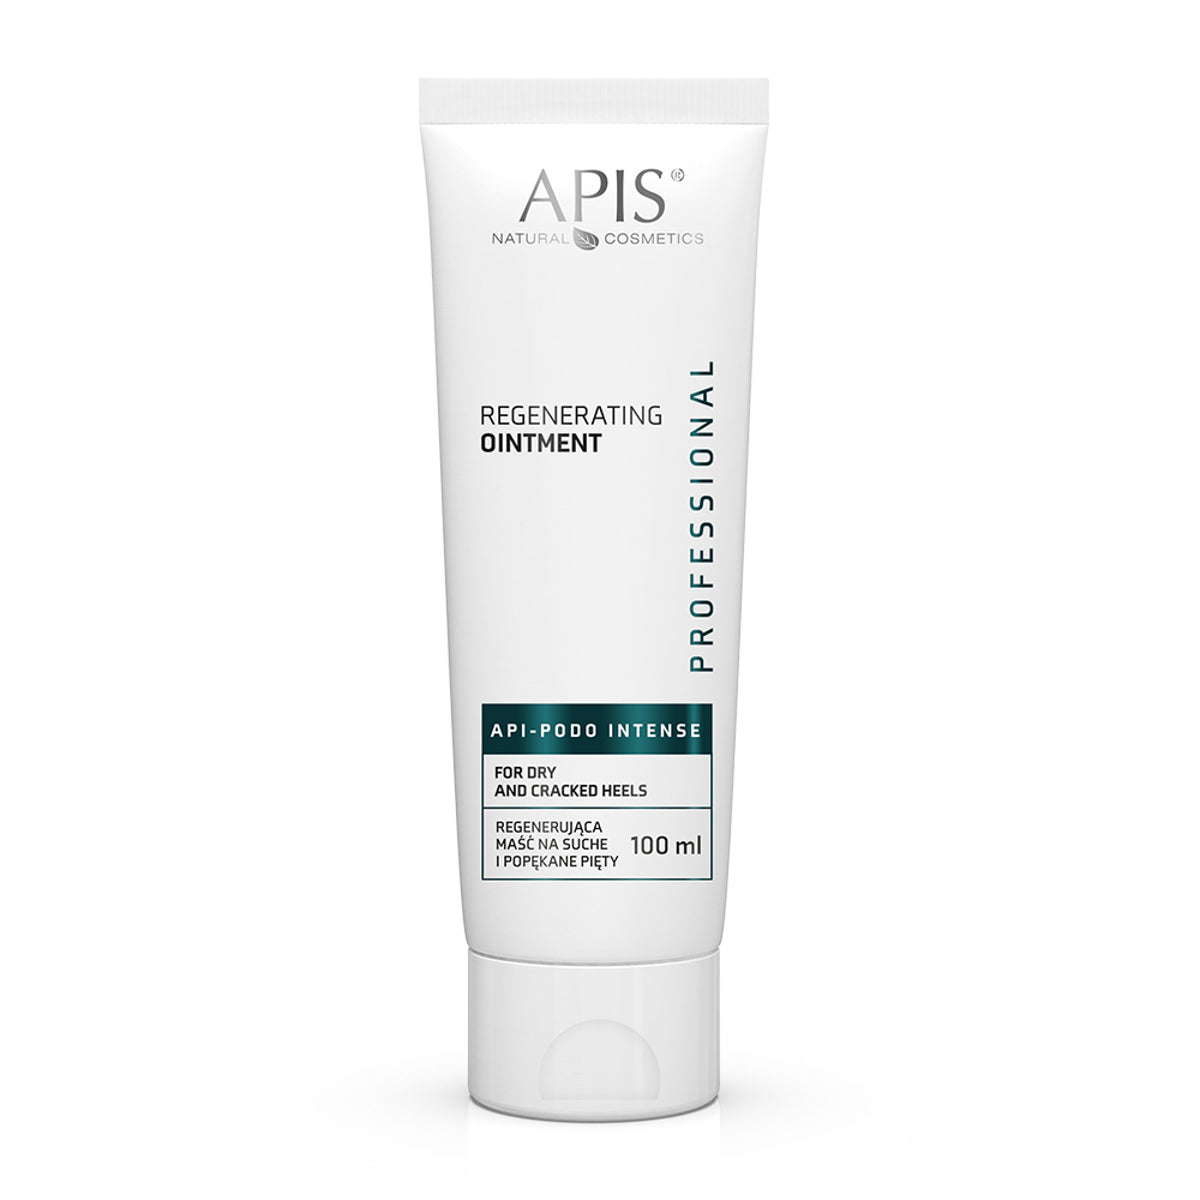 Apis Api-Podo Intense Regenerating Ointment for dry and cracked heels 100ml